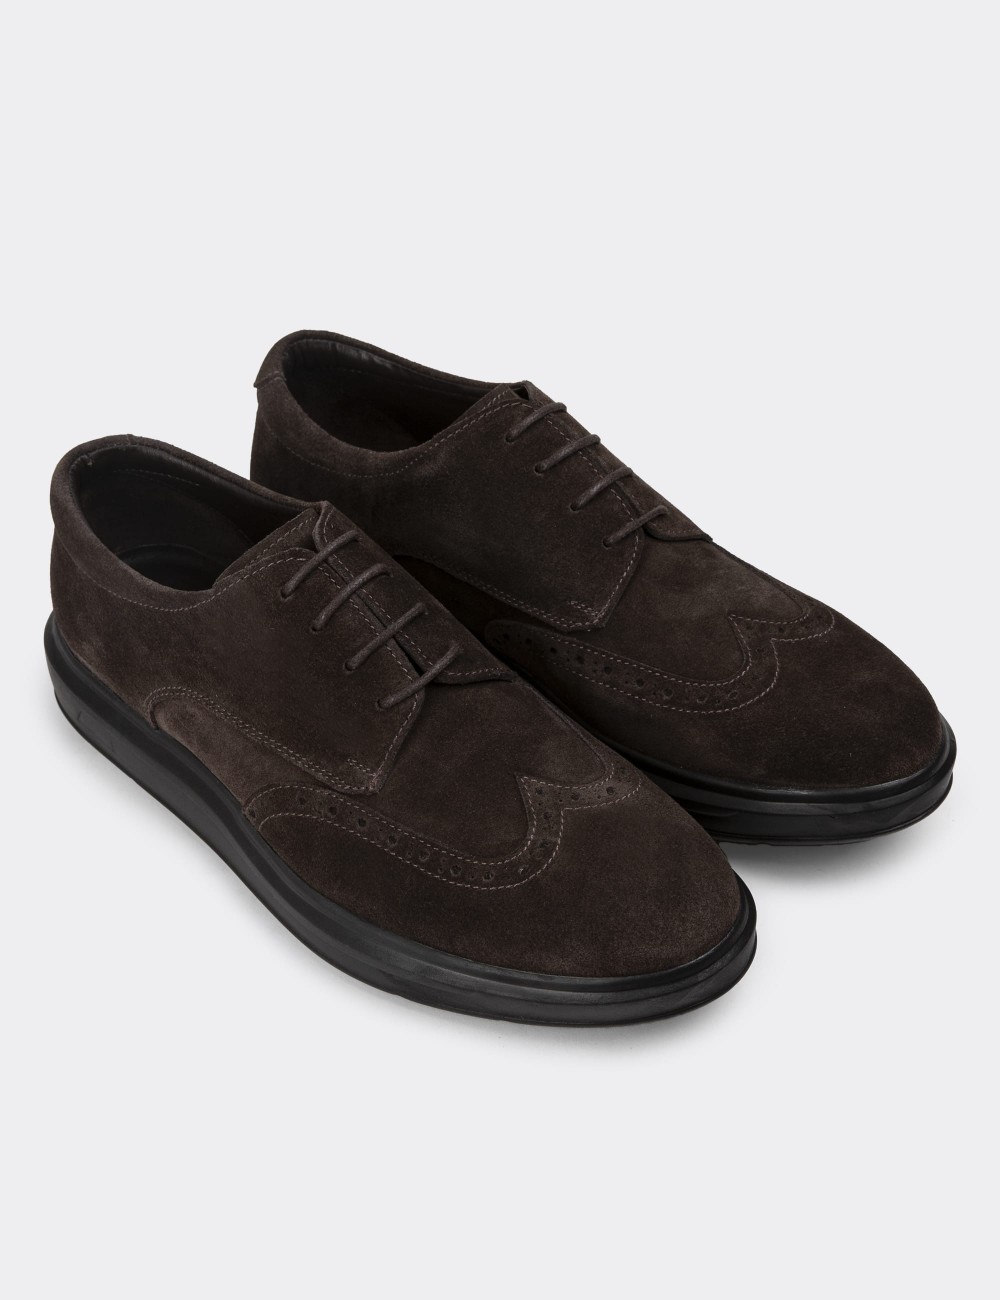 Brown Suede Leather Lace-up Shoes - 01942MKHVP02